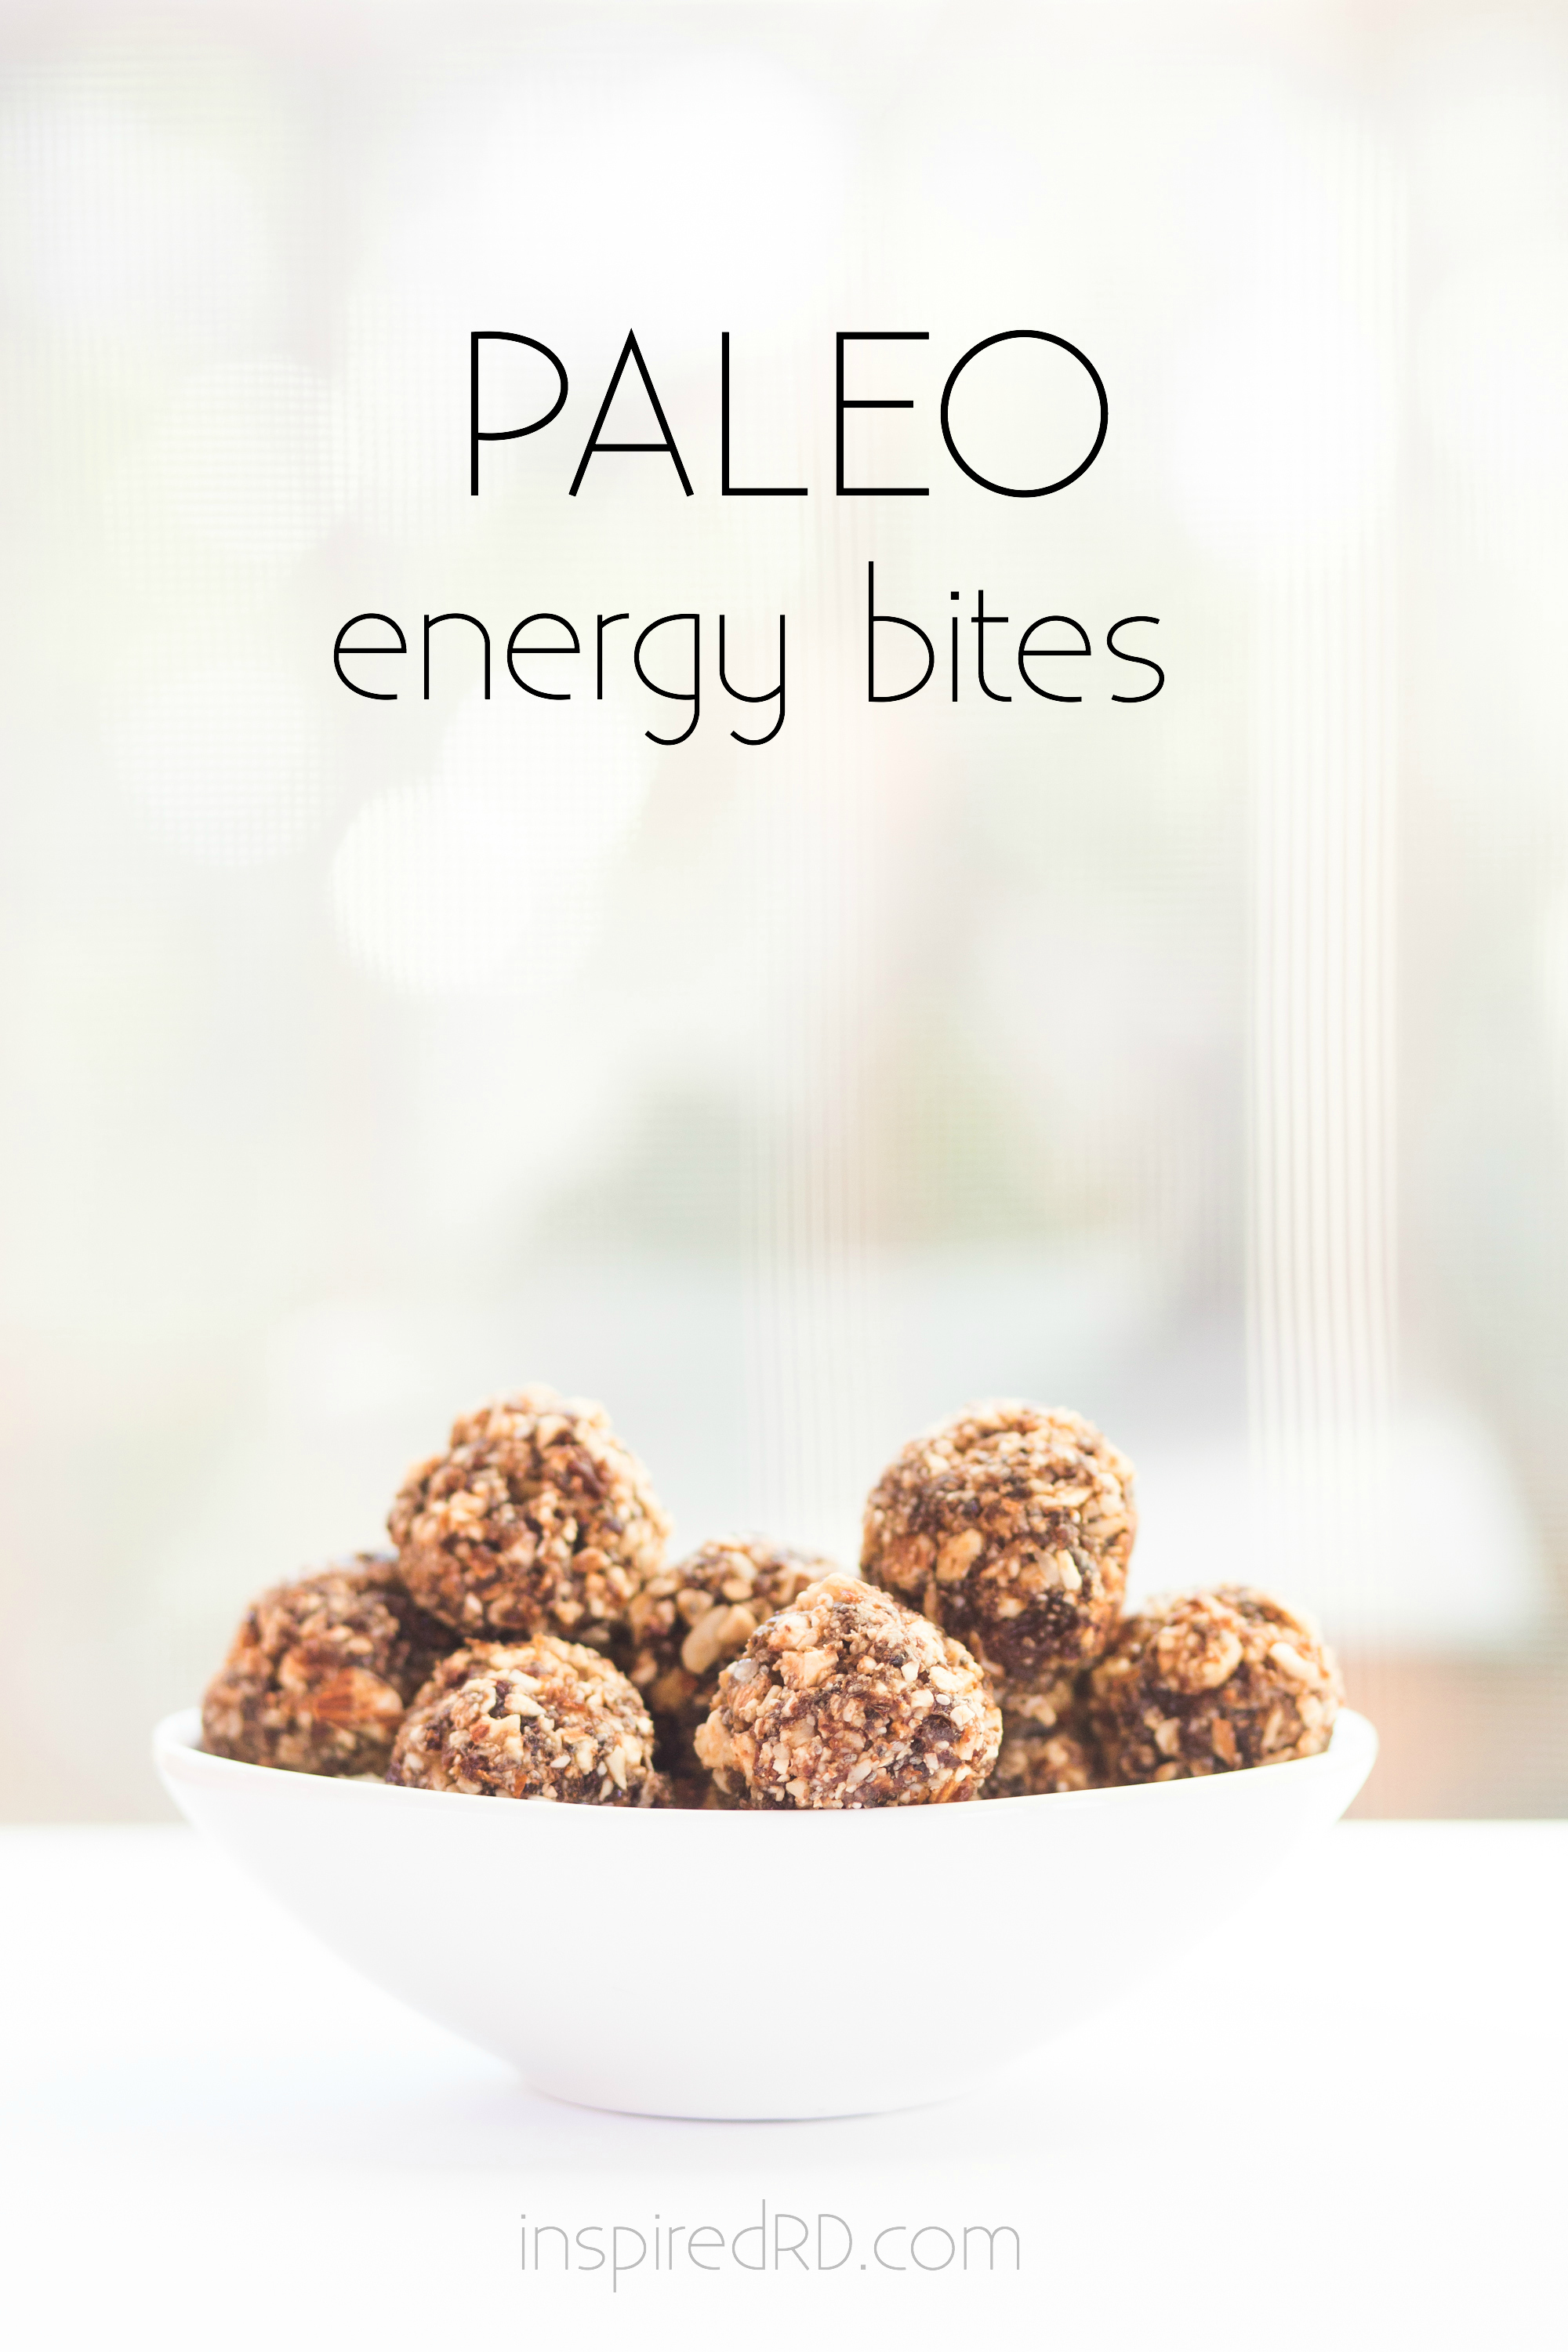 These paleo energy bites are so easy to make! Includes nut-free and no-bake options. Gluten-free!